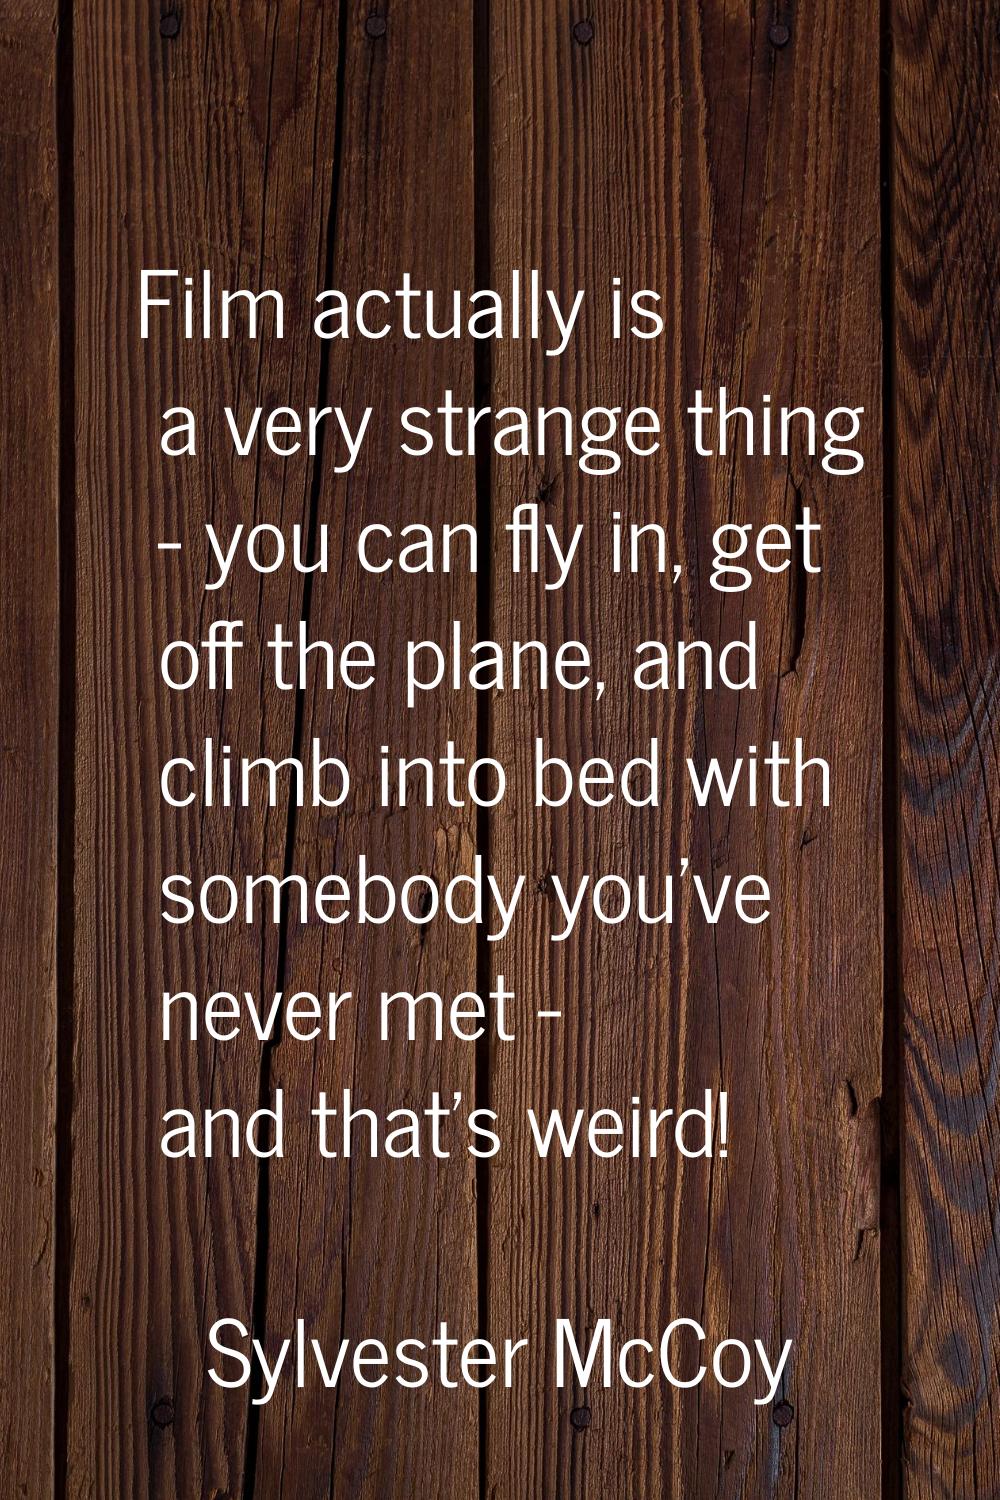 Film actually is a very strange thing - you can fly in, get off the plane, and climb into bed with 